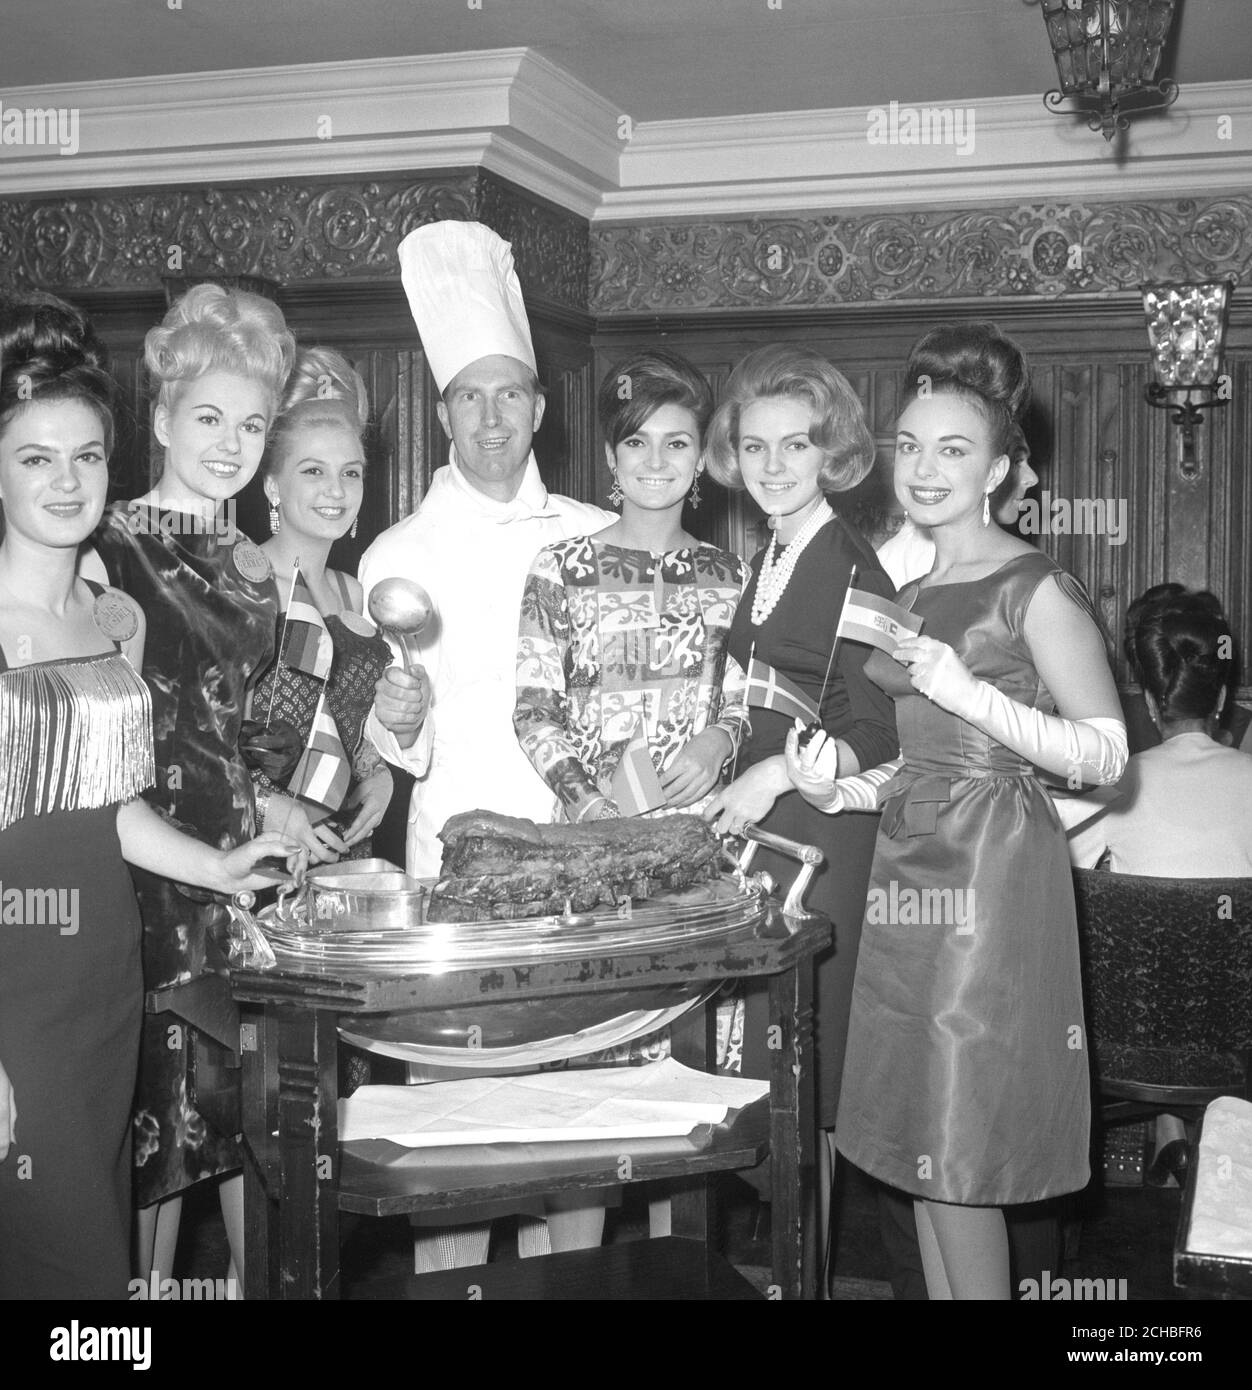 Miss World contestants are introduced to the British dish of roast beef during a dinner at the Baron of Beef restaurant in Gutter Lane, London. (l-r) Miss Austria Sonja Russ, 18, Miss Germany Susie Gruner, 19, Miss Belgium Irene Godin, 19, Miss Sweden Grete Qviberg, 19, Miss Denmark Aino Korva, 20, and Miss South Africa Louise Crous, 21. Stock Photo